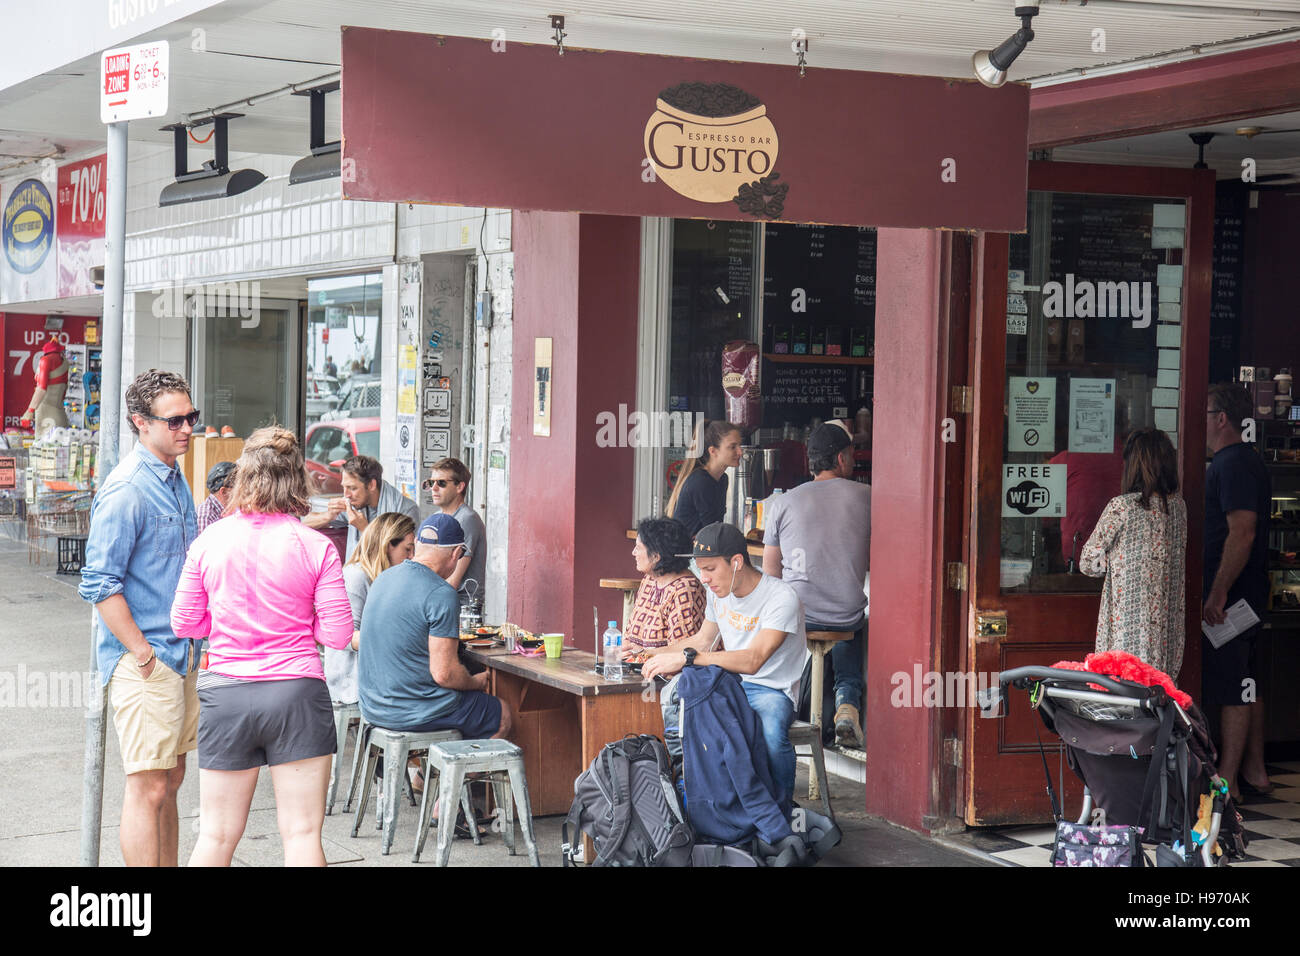 Gusto cafe restaurant in Bondi beach, Sydney , Australia with many customers for coffee and breakfast on a saturday morning. Stock Photo